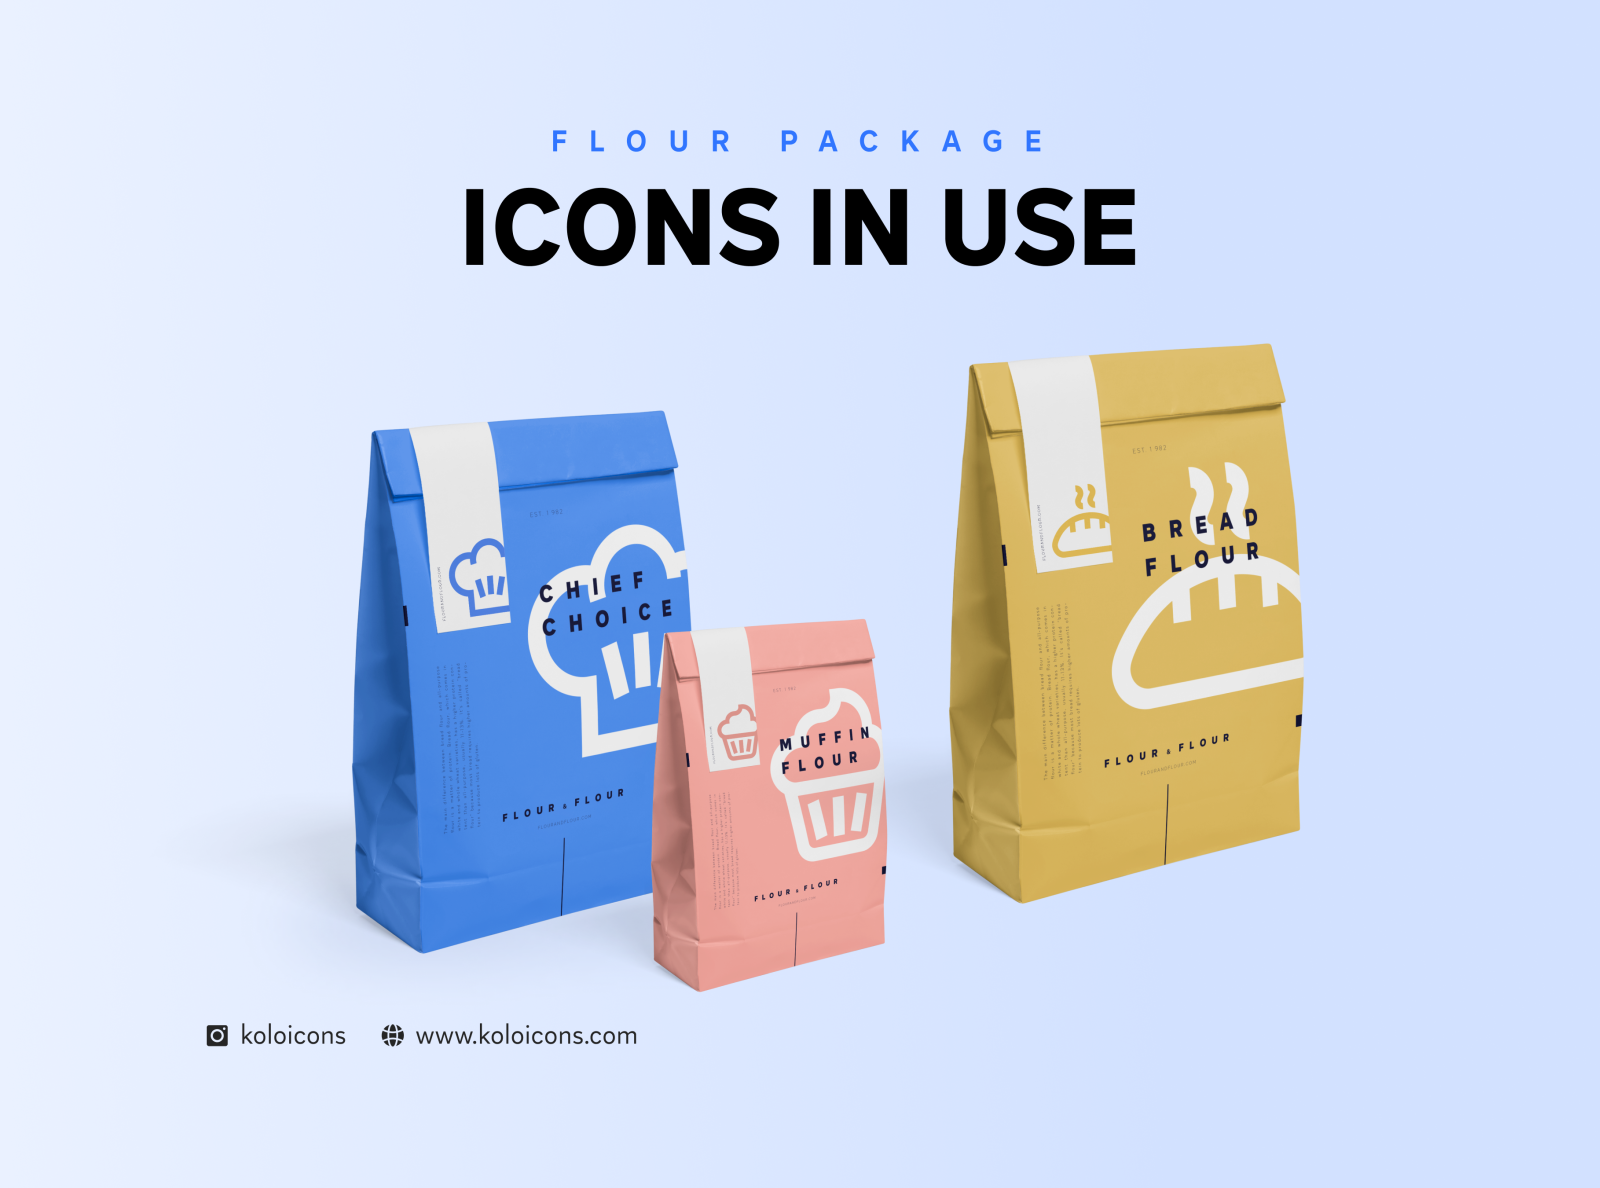 Package design icon by koloicons on Dribbble